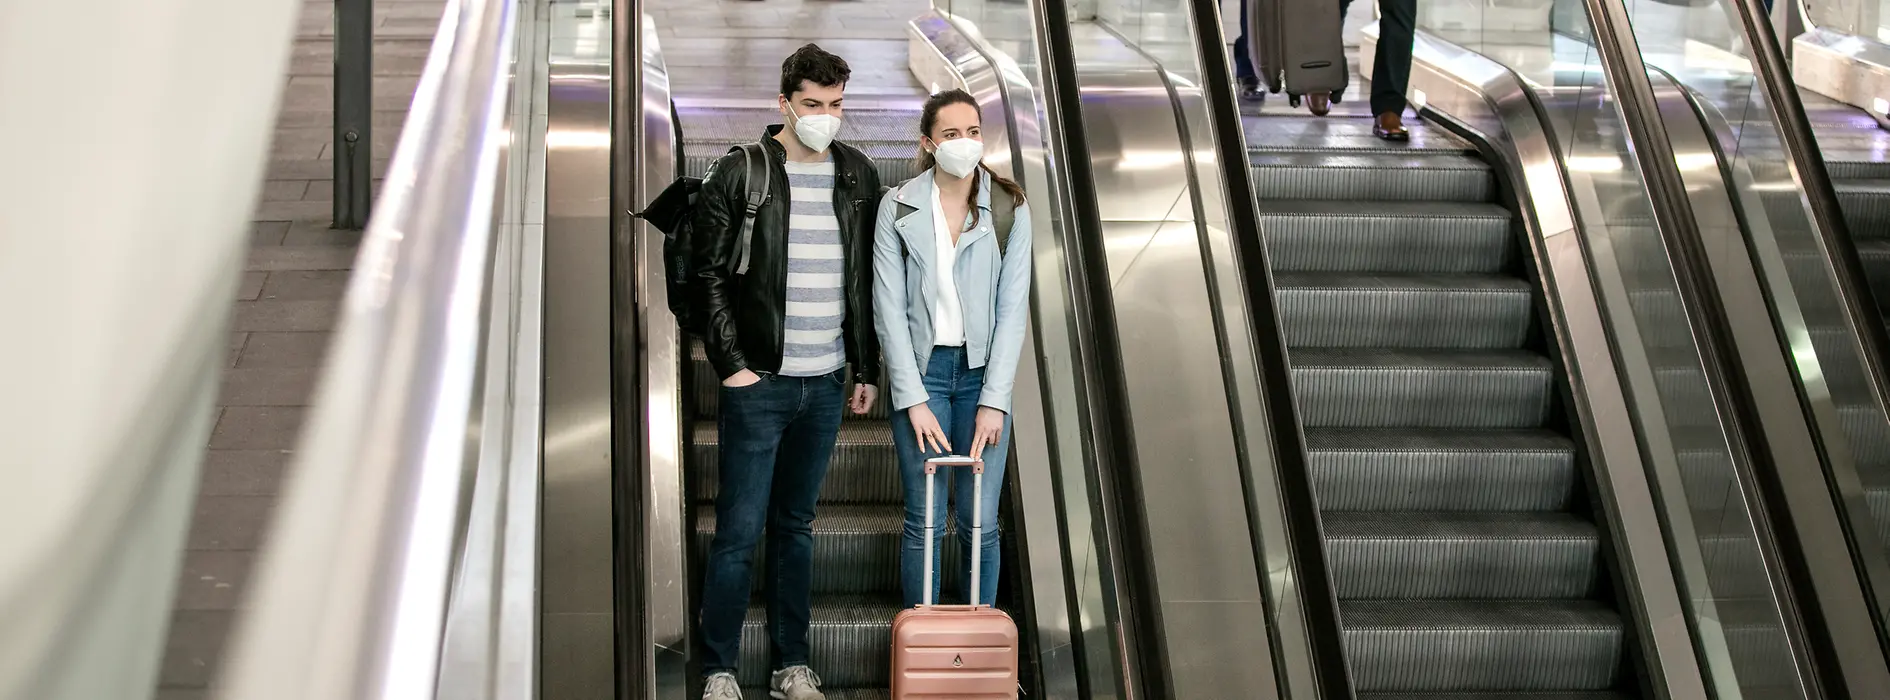 People wearing masks at the train station